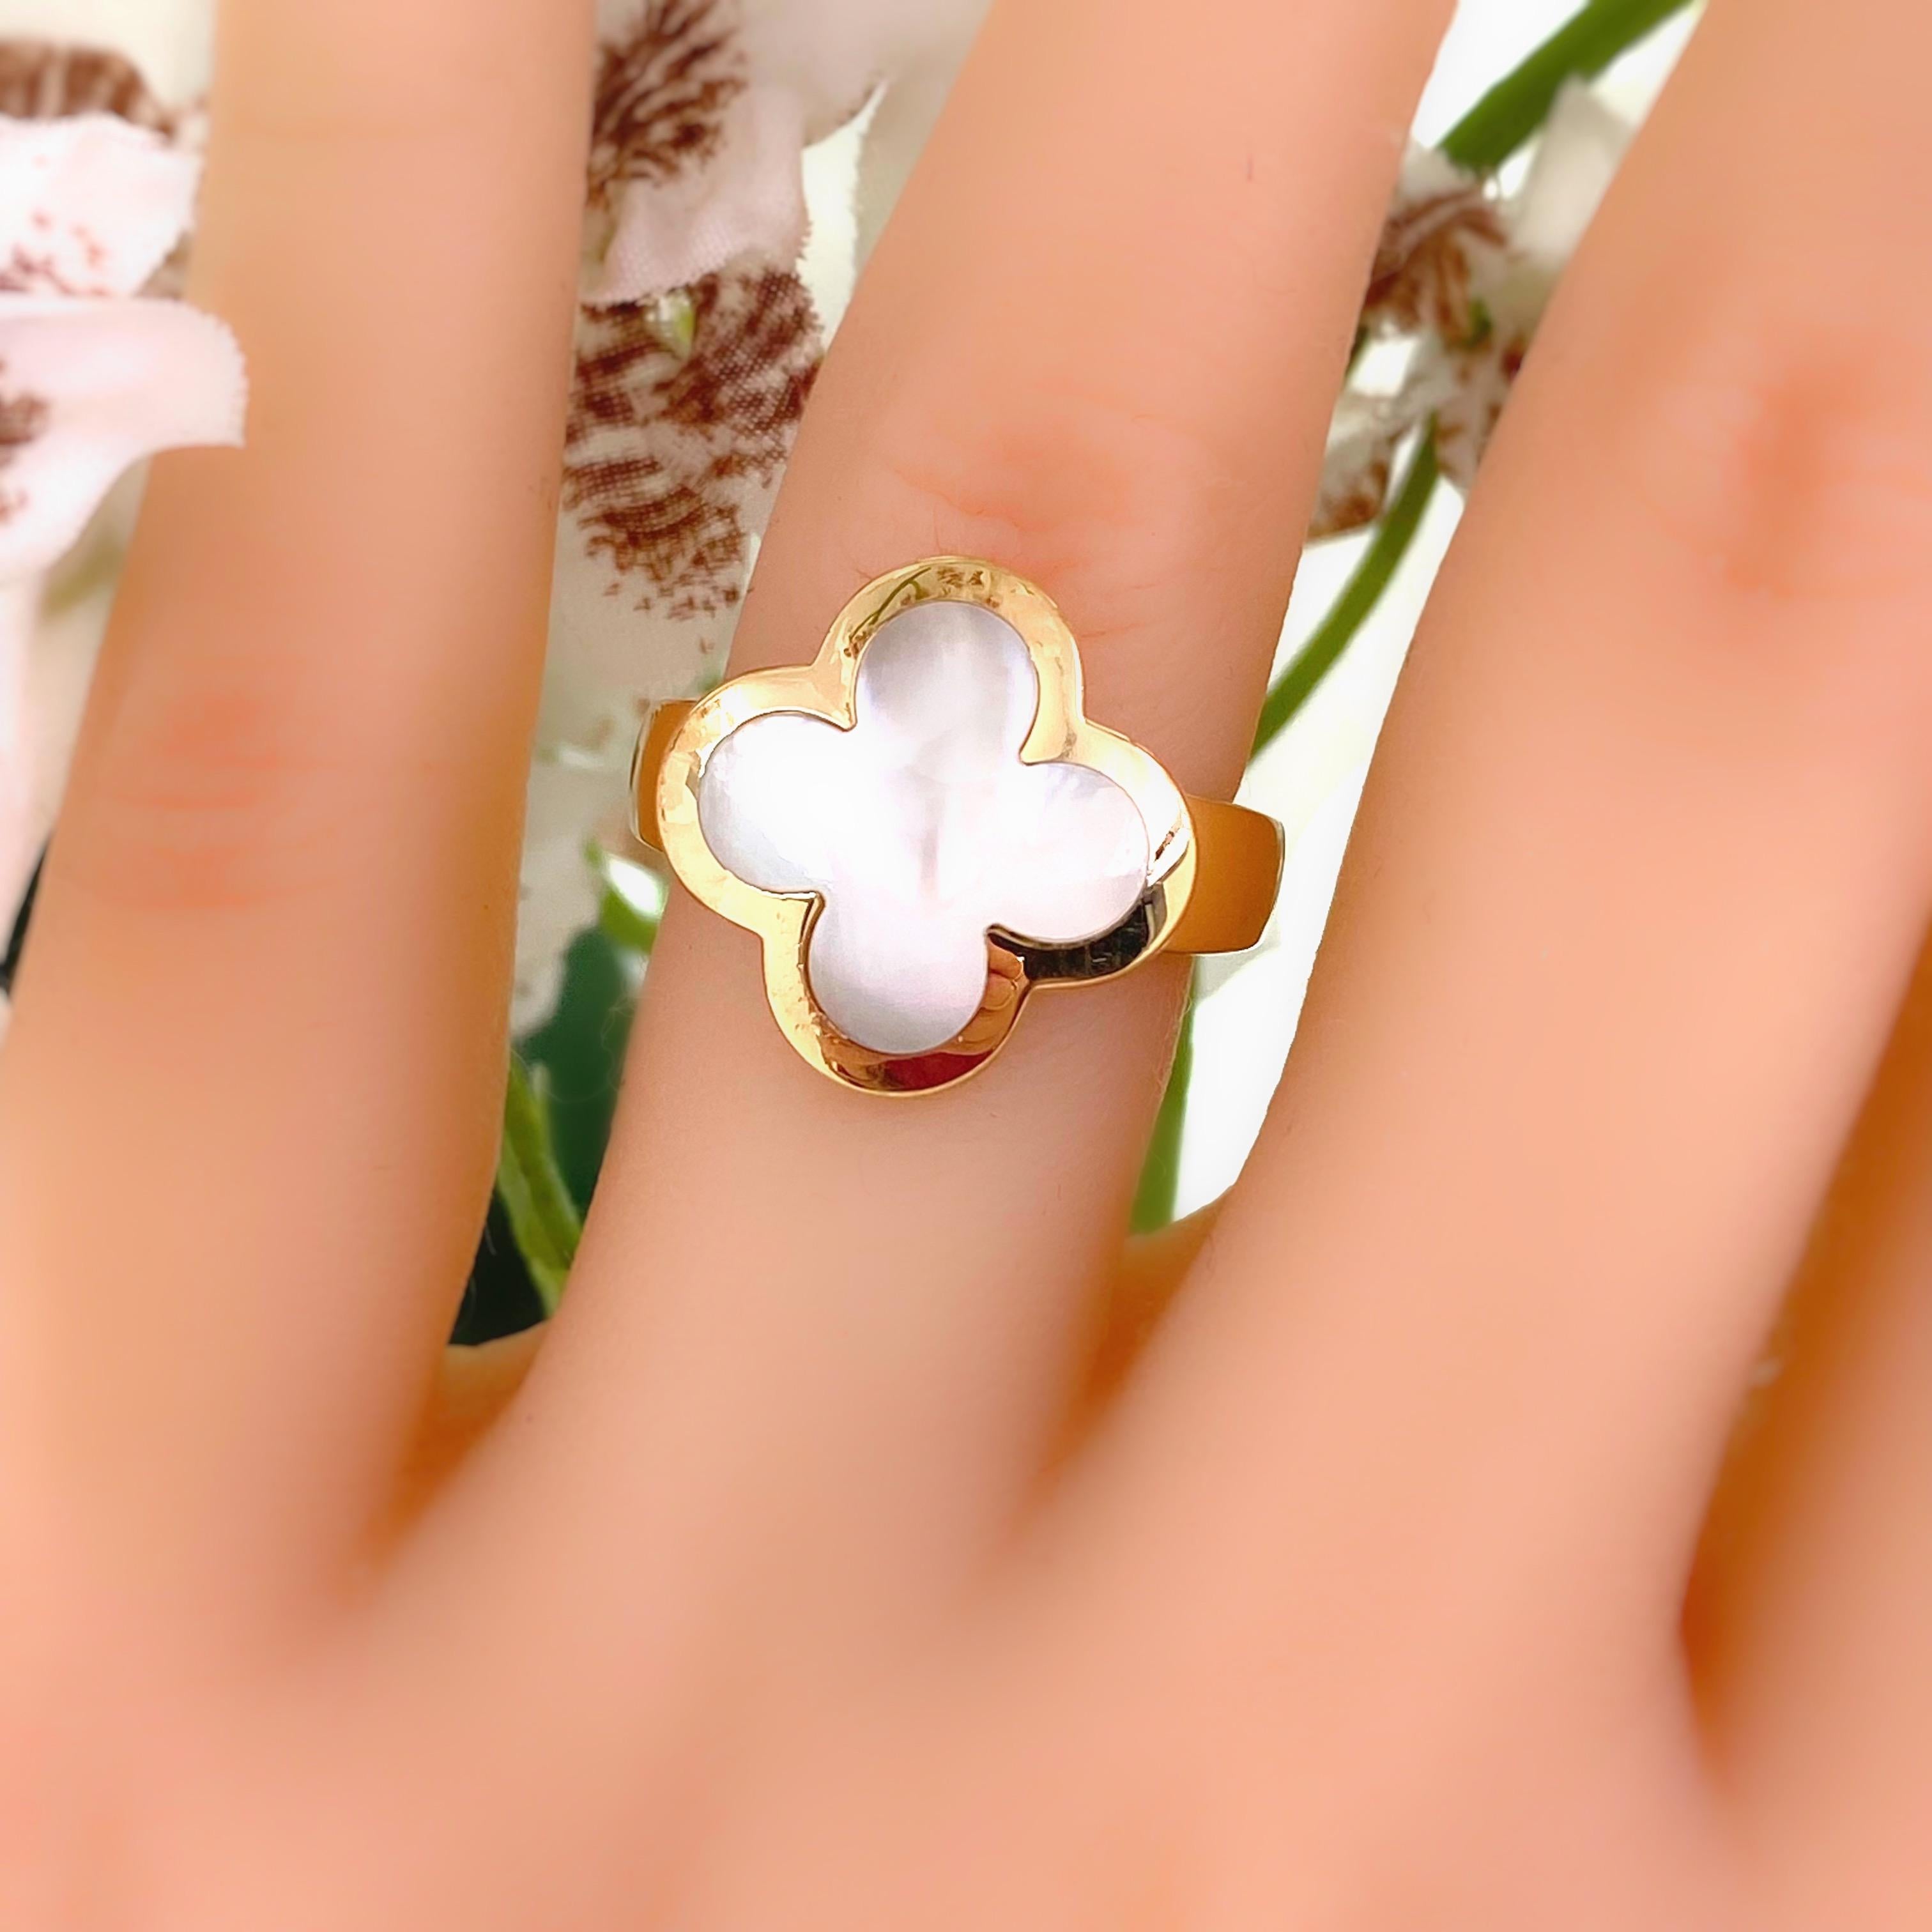 Van Cleef & Arpels Pure Alhambra Ring
Style:  Pure Alhambra Ring
Ref. number:  VCA RA 35900
Metal:  18kt Yellow Gold
Size:  US 5 / French 50
Gemstone:  Mother of Pearl
Width:  17.5 MM
Hallmark:  VCA 750 50 CL7****
Includes:  COA - ELEGANT RING